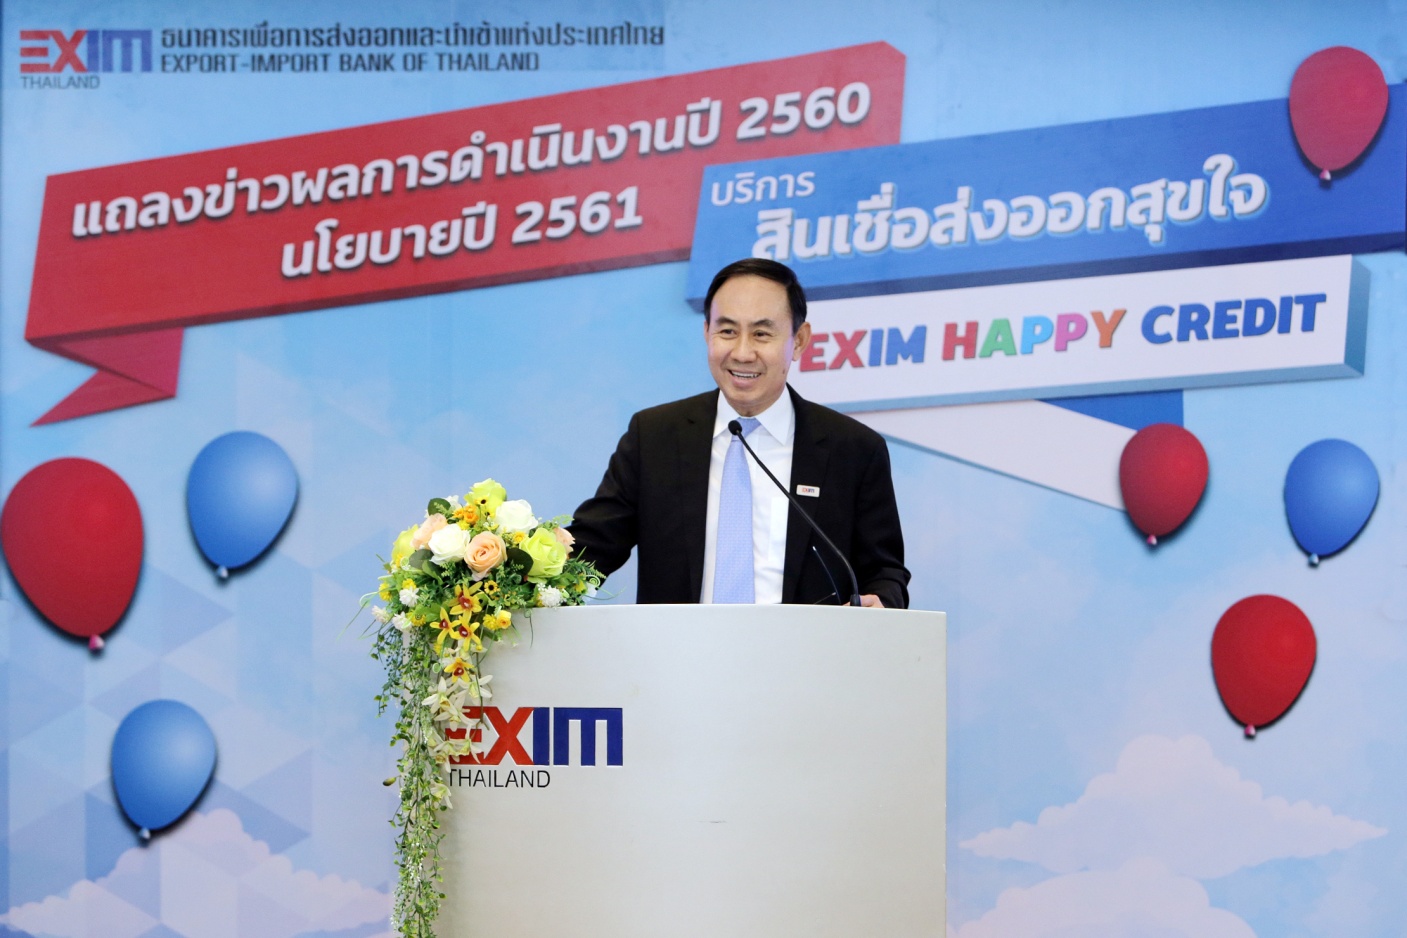 EXIM Thailand Announces 2017 Operating Results, Focusing on Thailand’s CLMV Trade and Investment Promotion and SME Exporter Incubation